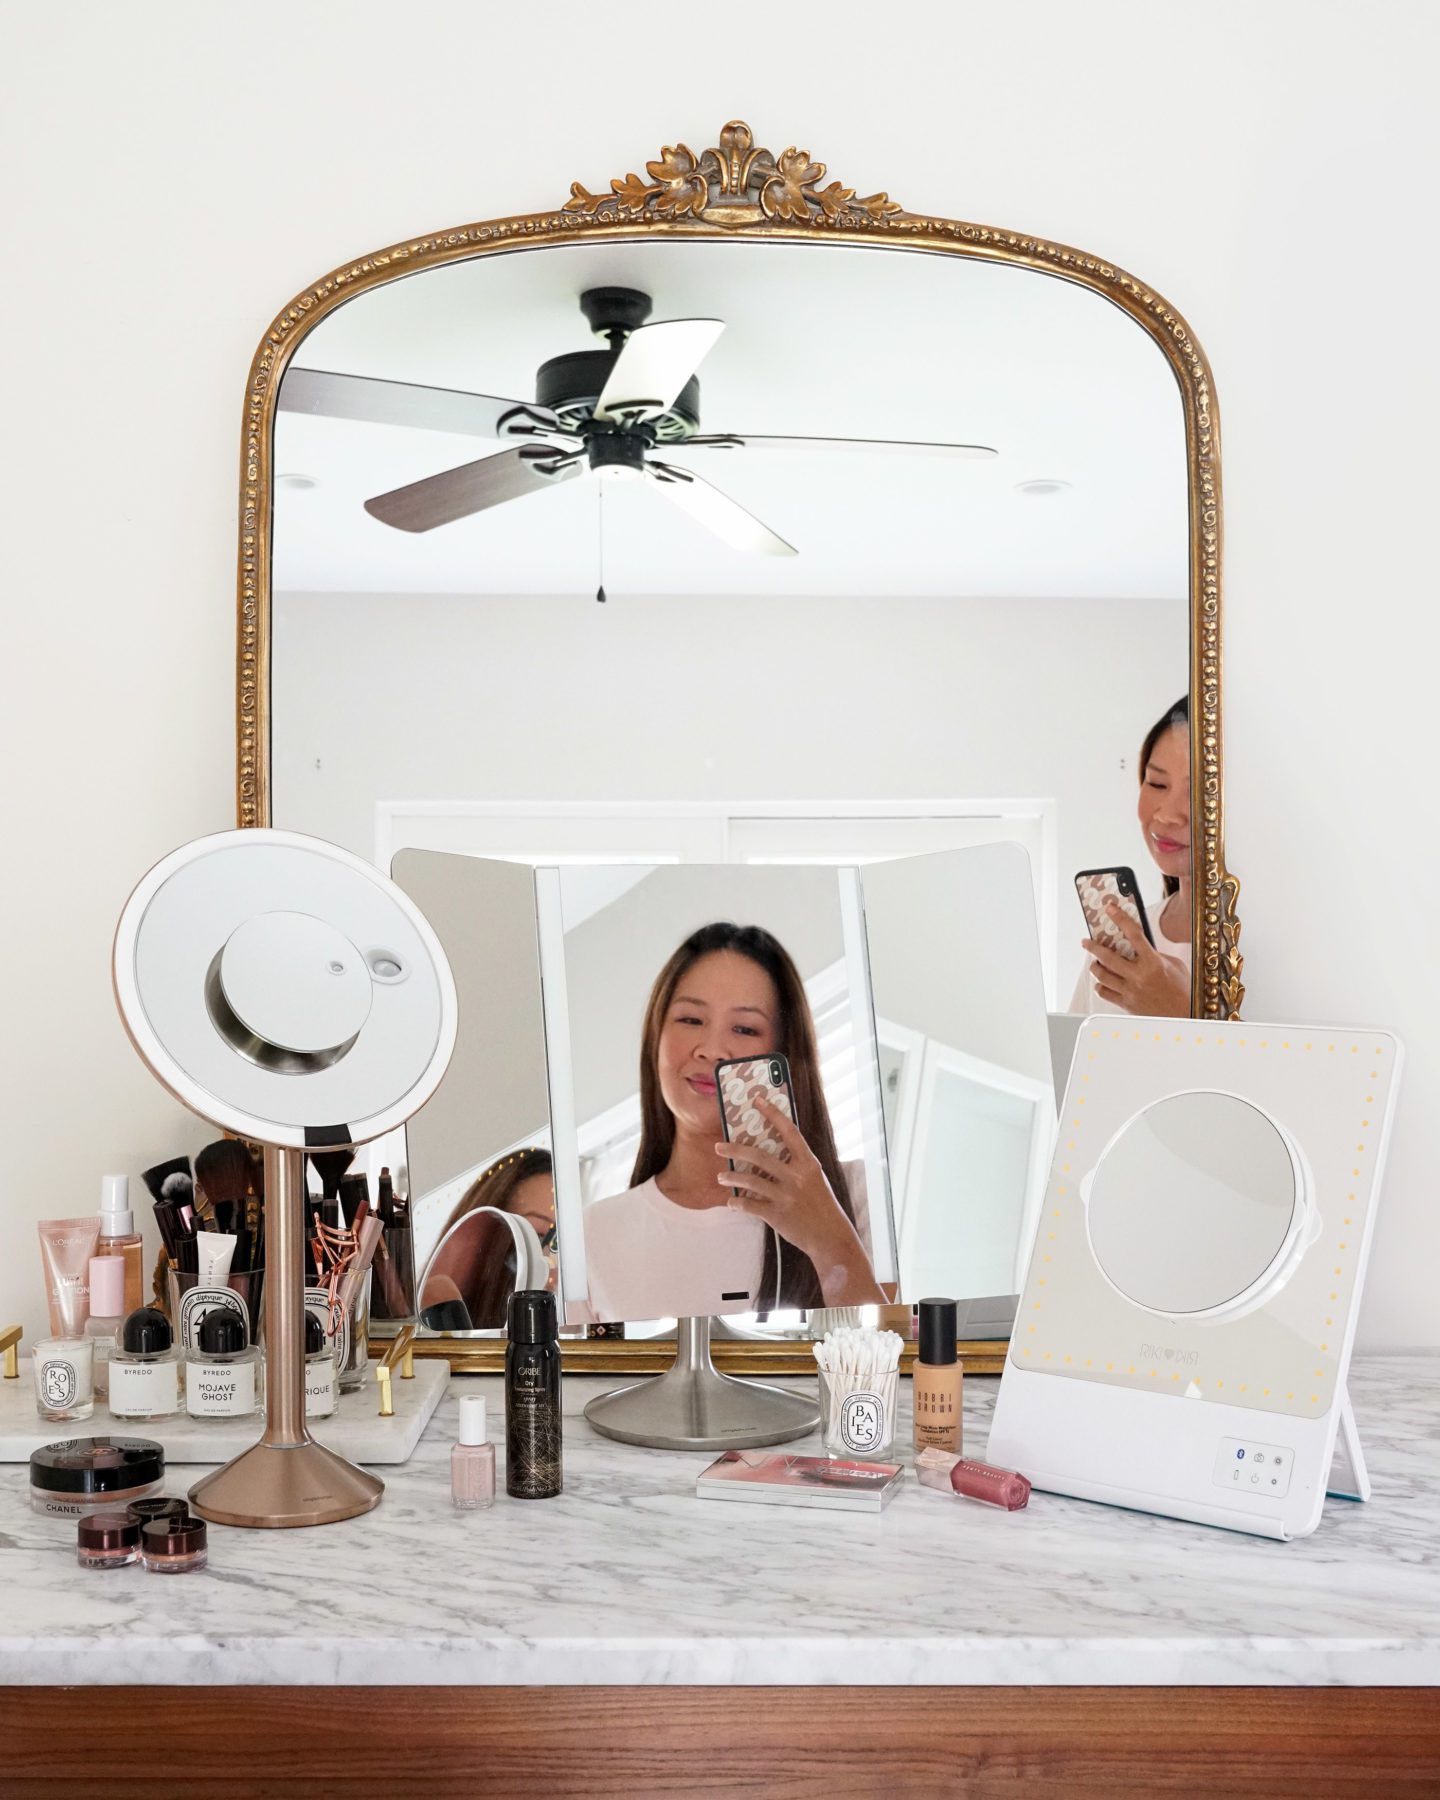 Best Makeup Mirrors for Your Vanity: Simplehuman and Glamcor